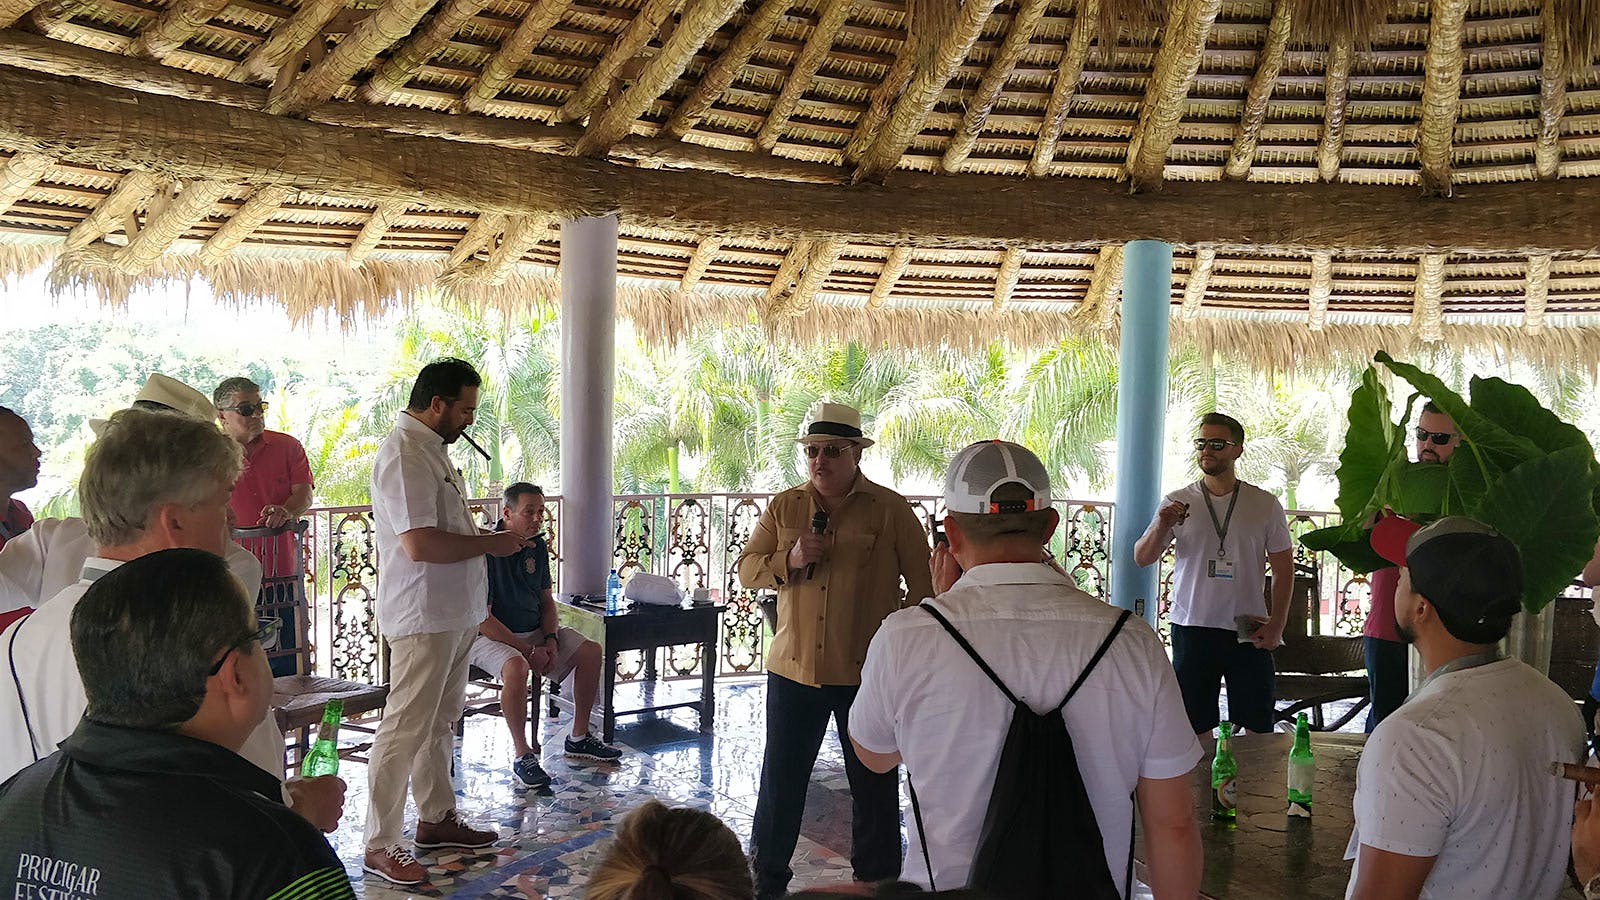 Carlos Fuente Jr., standing at Chateau de la Fuente, tells visitors the story of how he defied critics by growing wrapper-quality tobacco in the Dominican Republic.